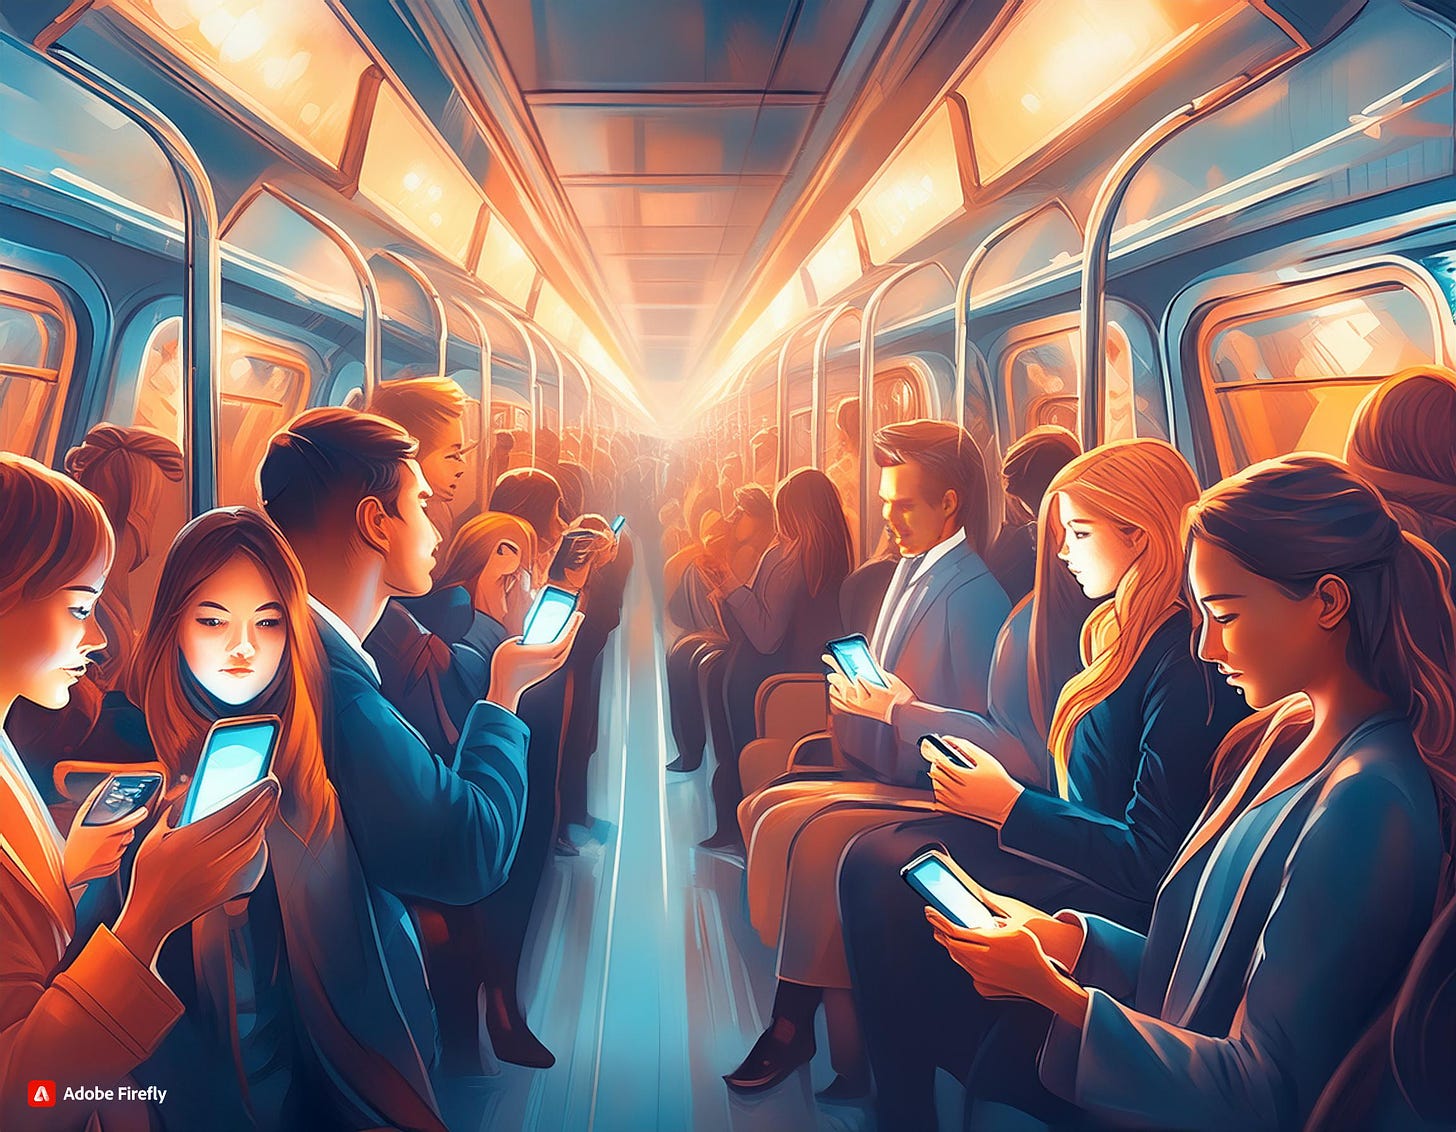 An illustration of a crowded subway train with passengers glued to their phones, faces illuminated by the screens.